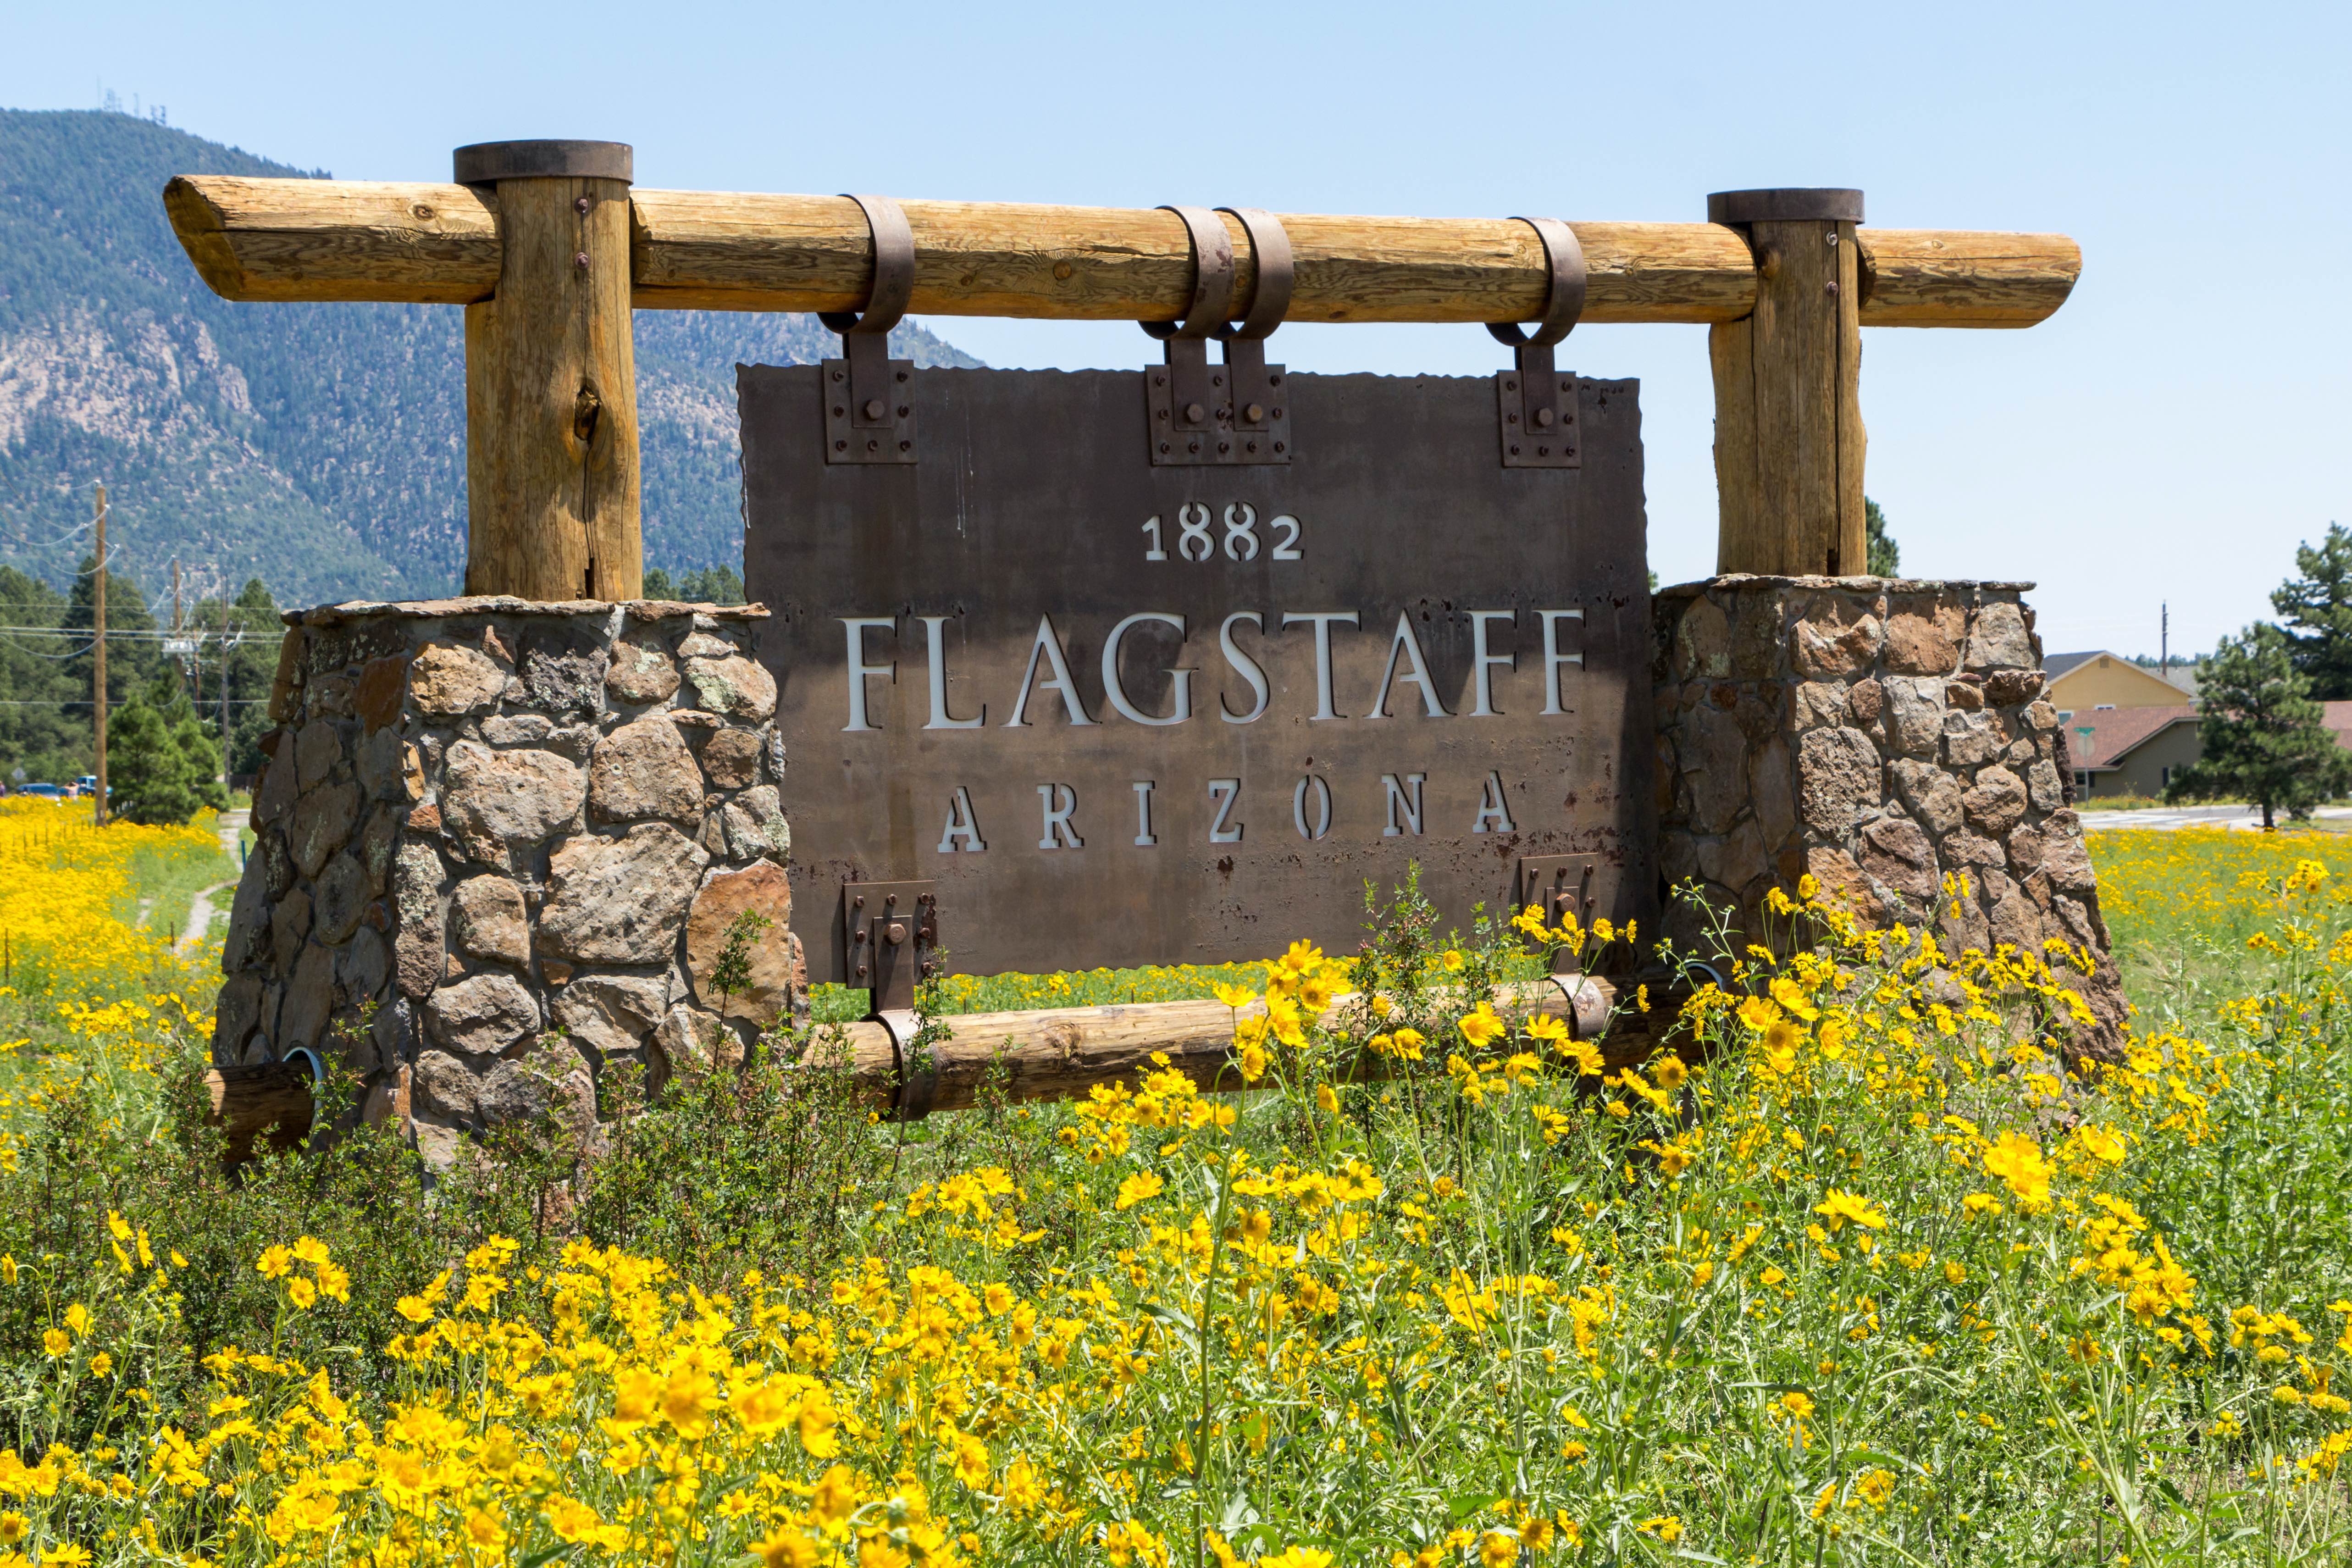 Entering sign Flagstaff Arizona in a mountain landscape with yellow flowers